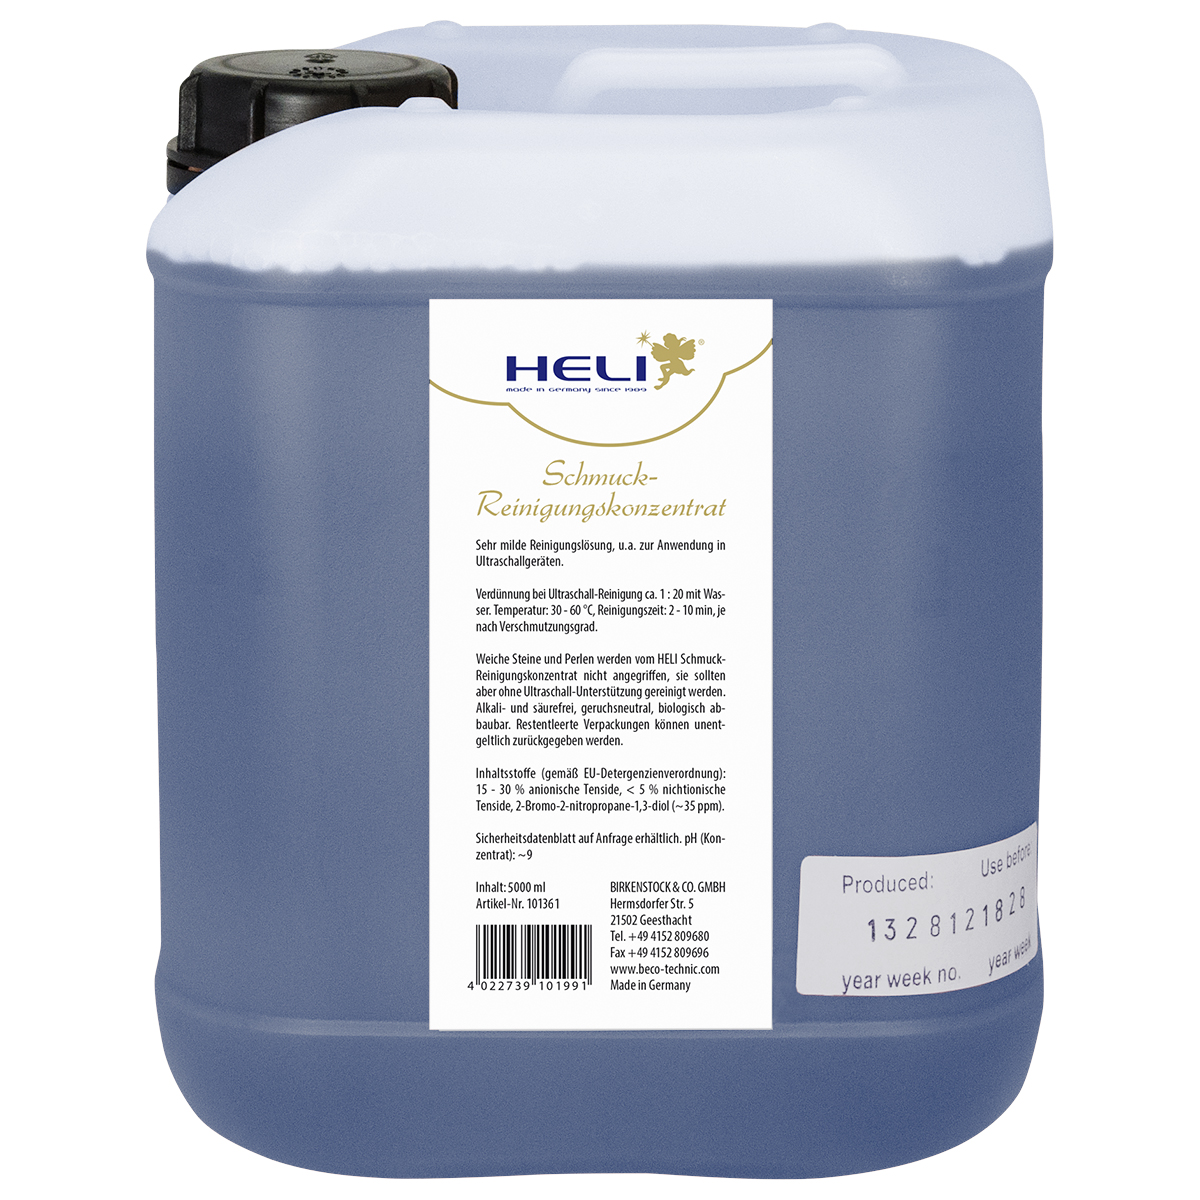 Heli cleaning concentrate for jewelry in ultrasonic unit, 1:20, 5 l